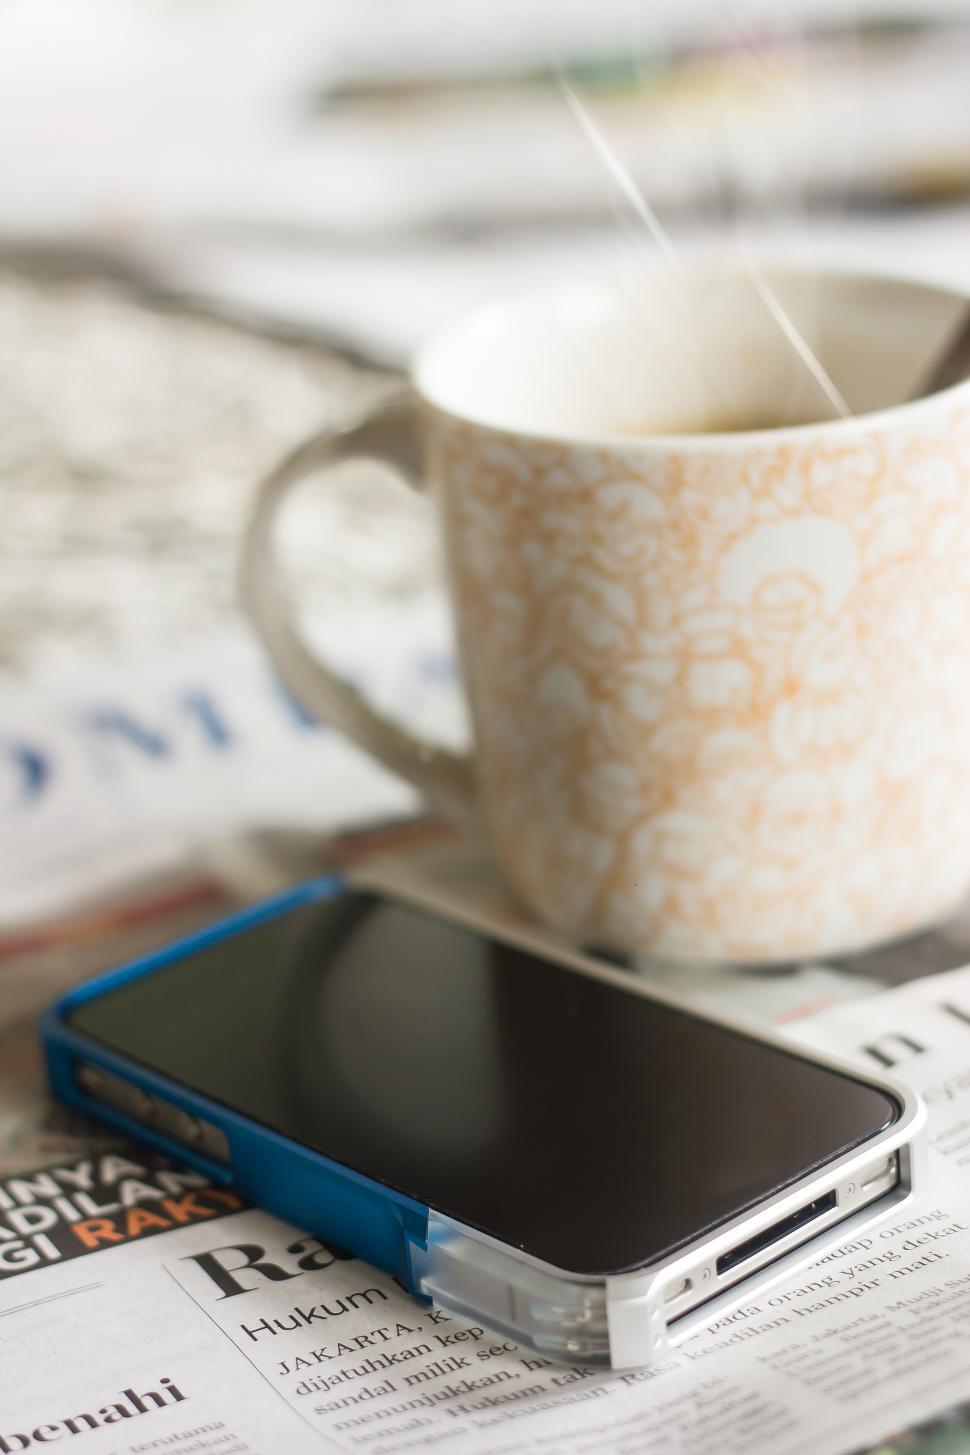 Free Image of Morning Coffee coffe and phone 